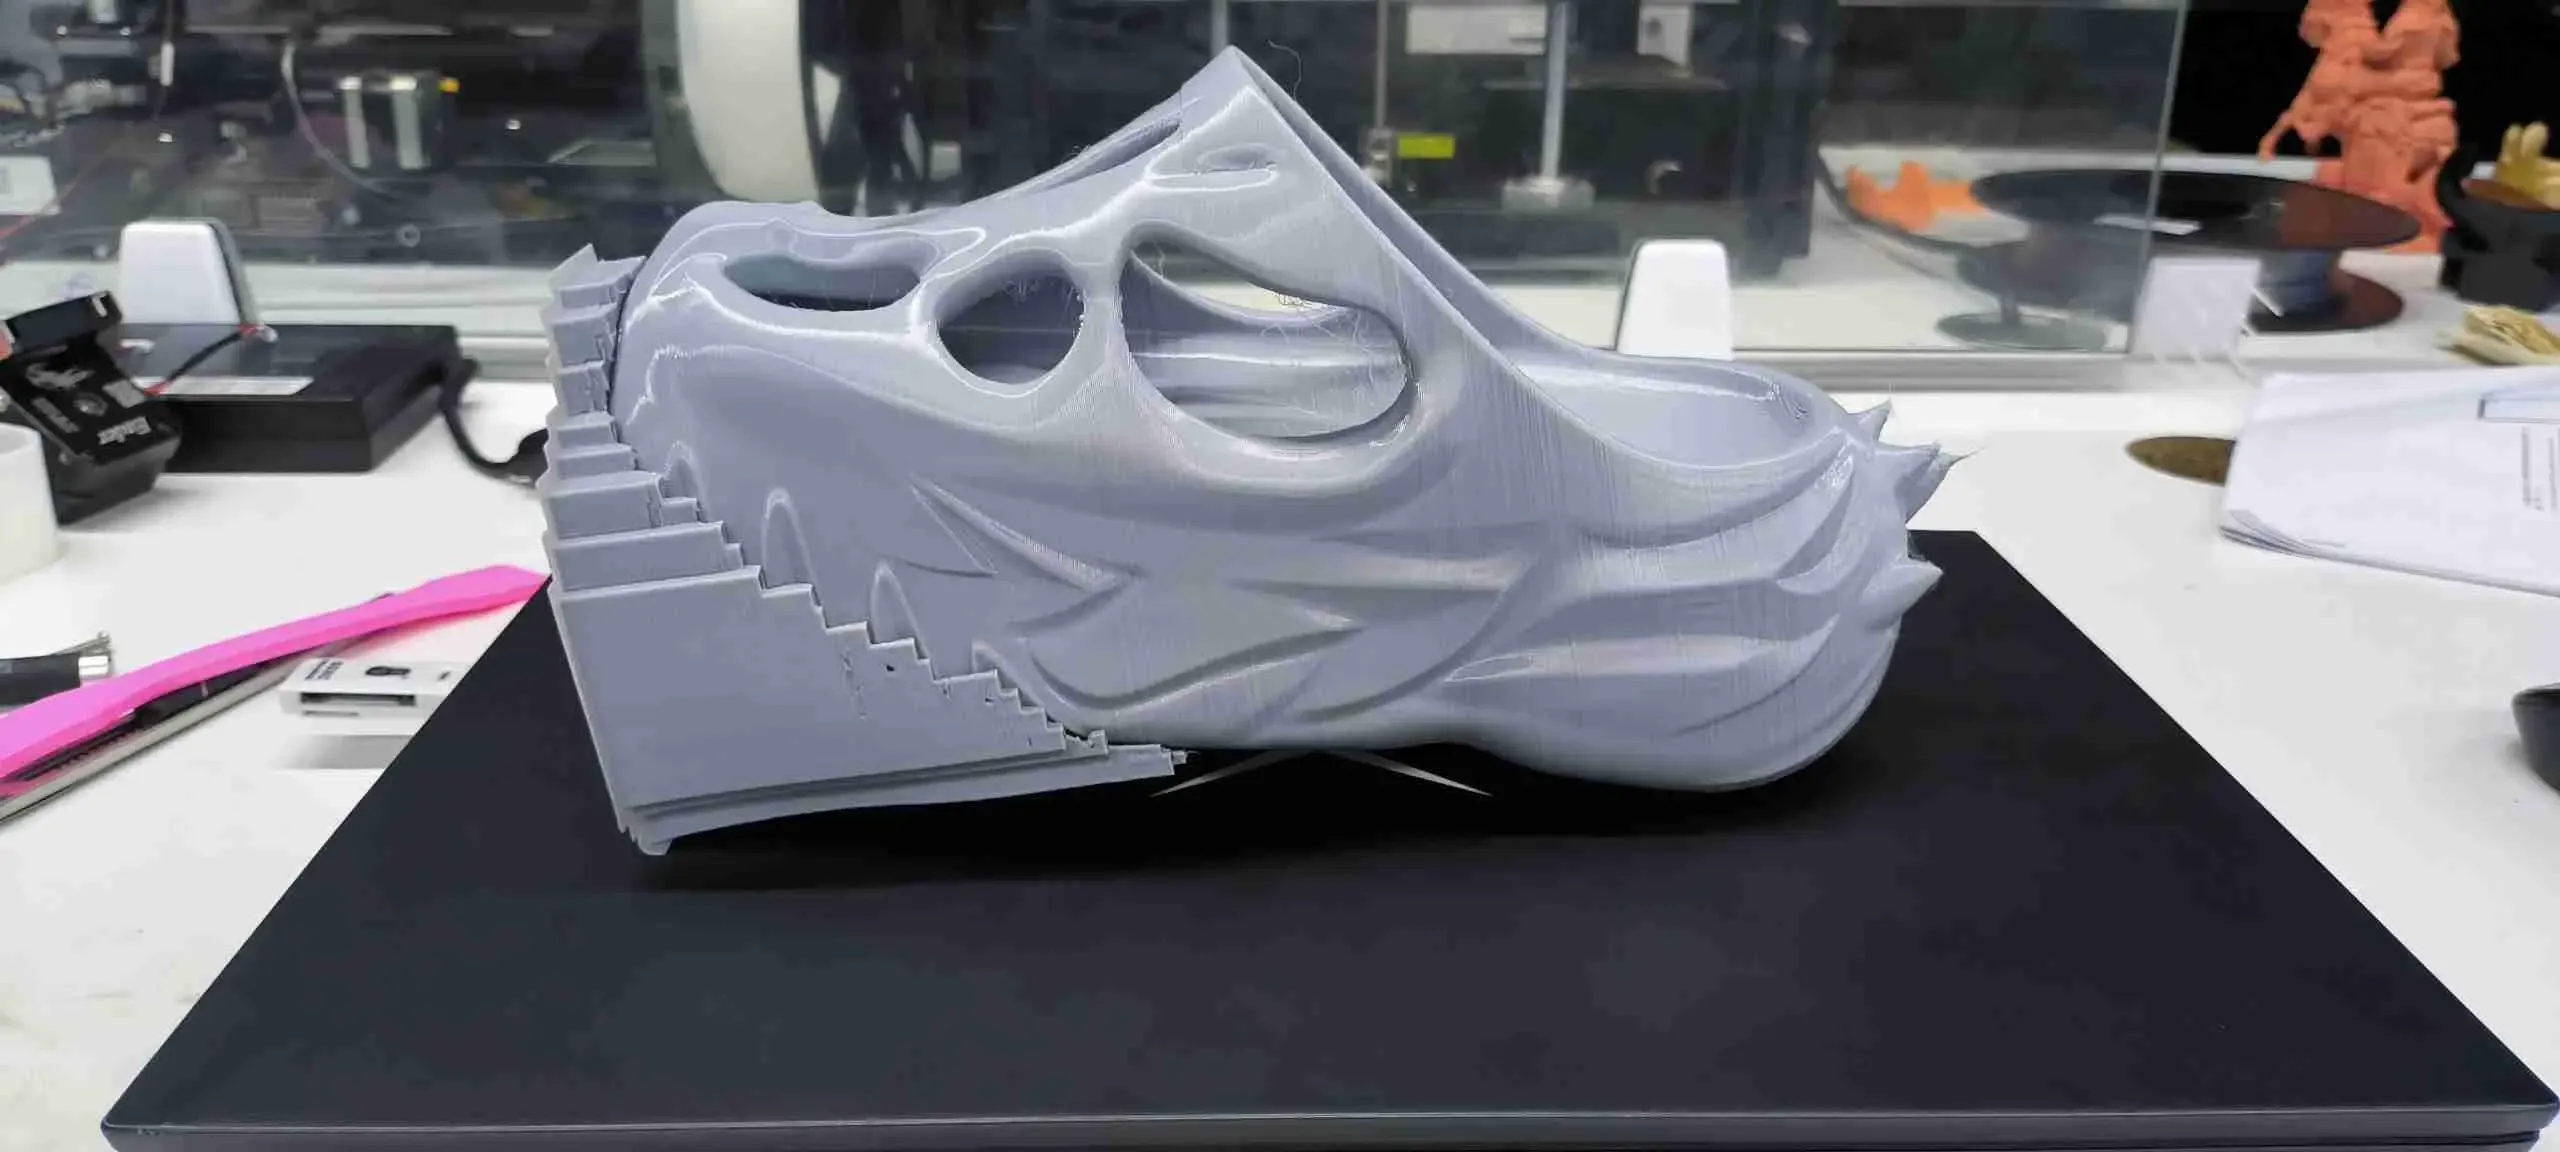 Dragon Flame shoes for 3dprinting